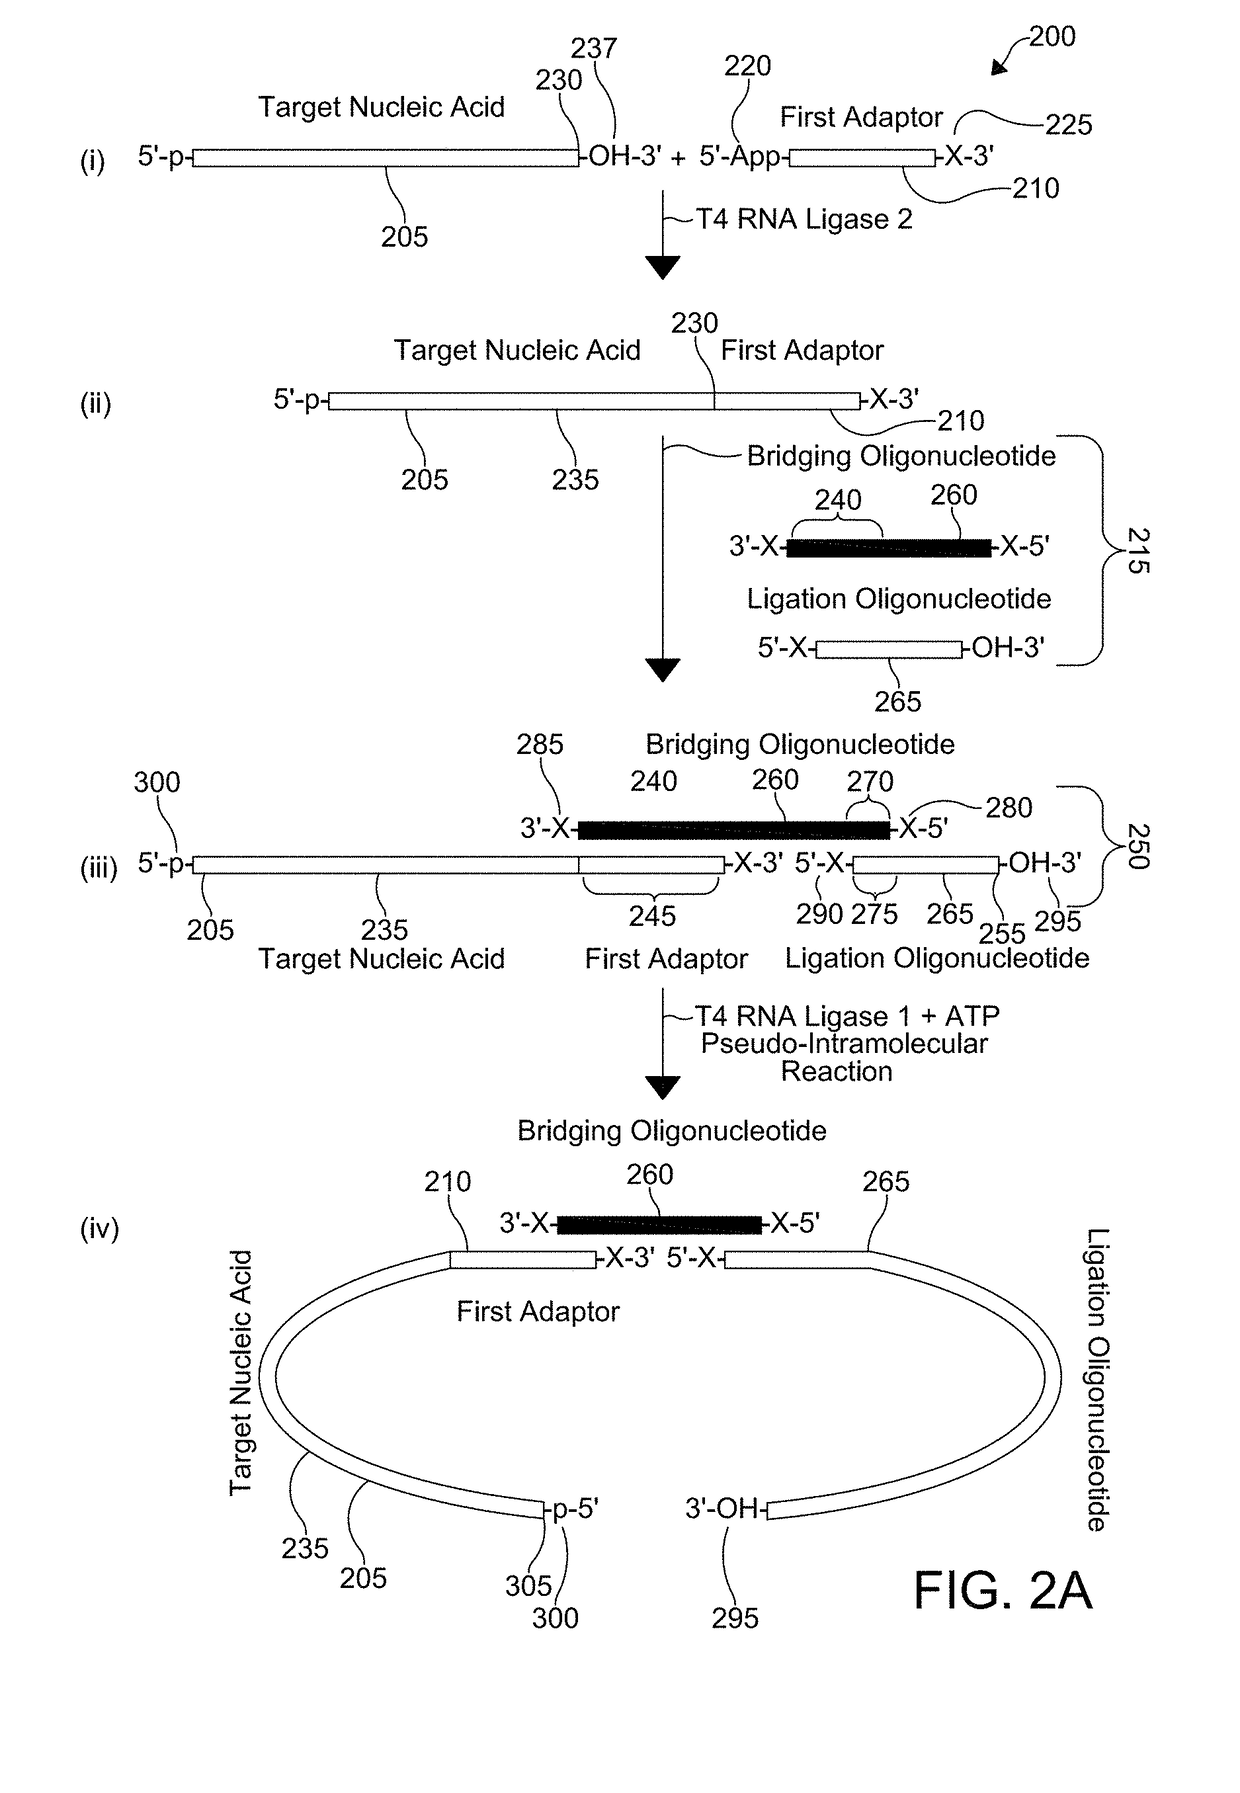 Coupling adaptors to a target nucleic acid